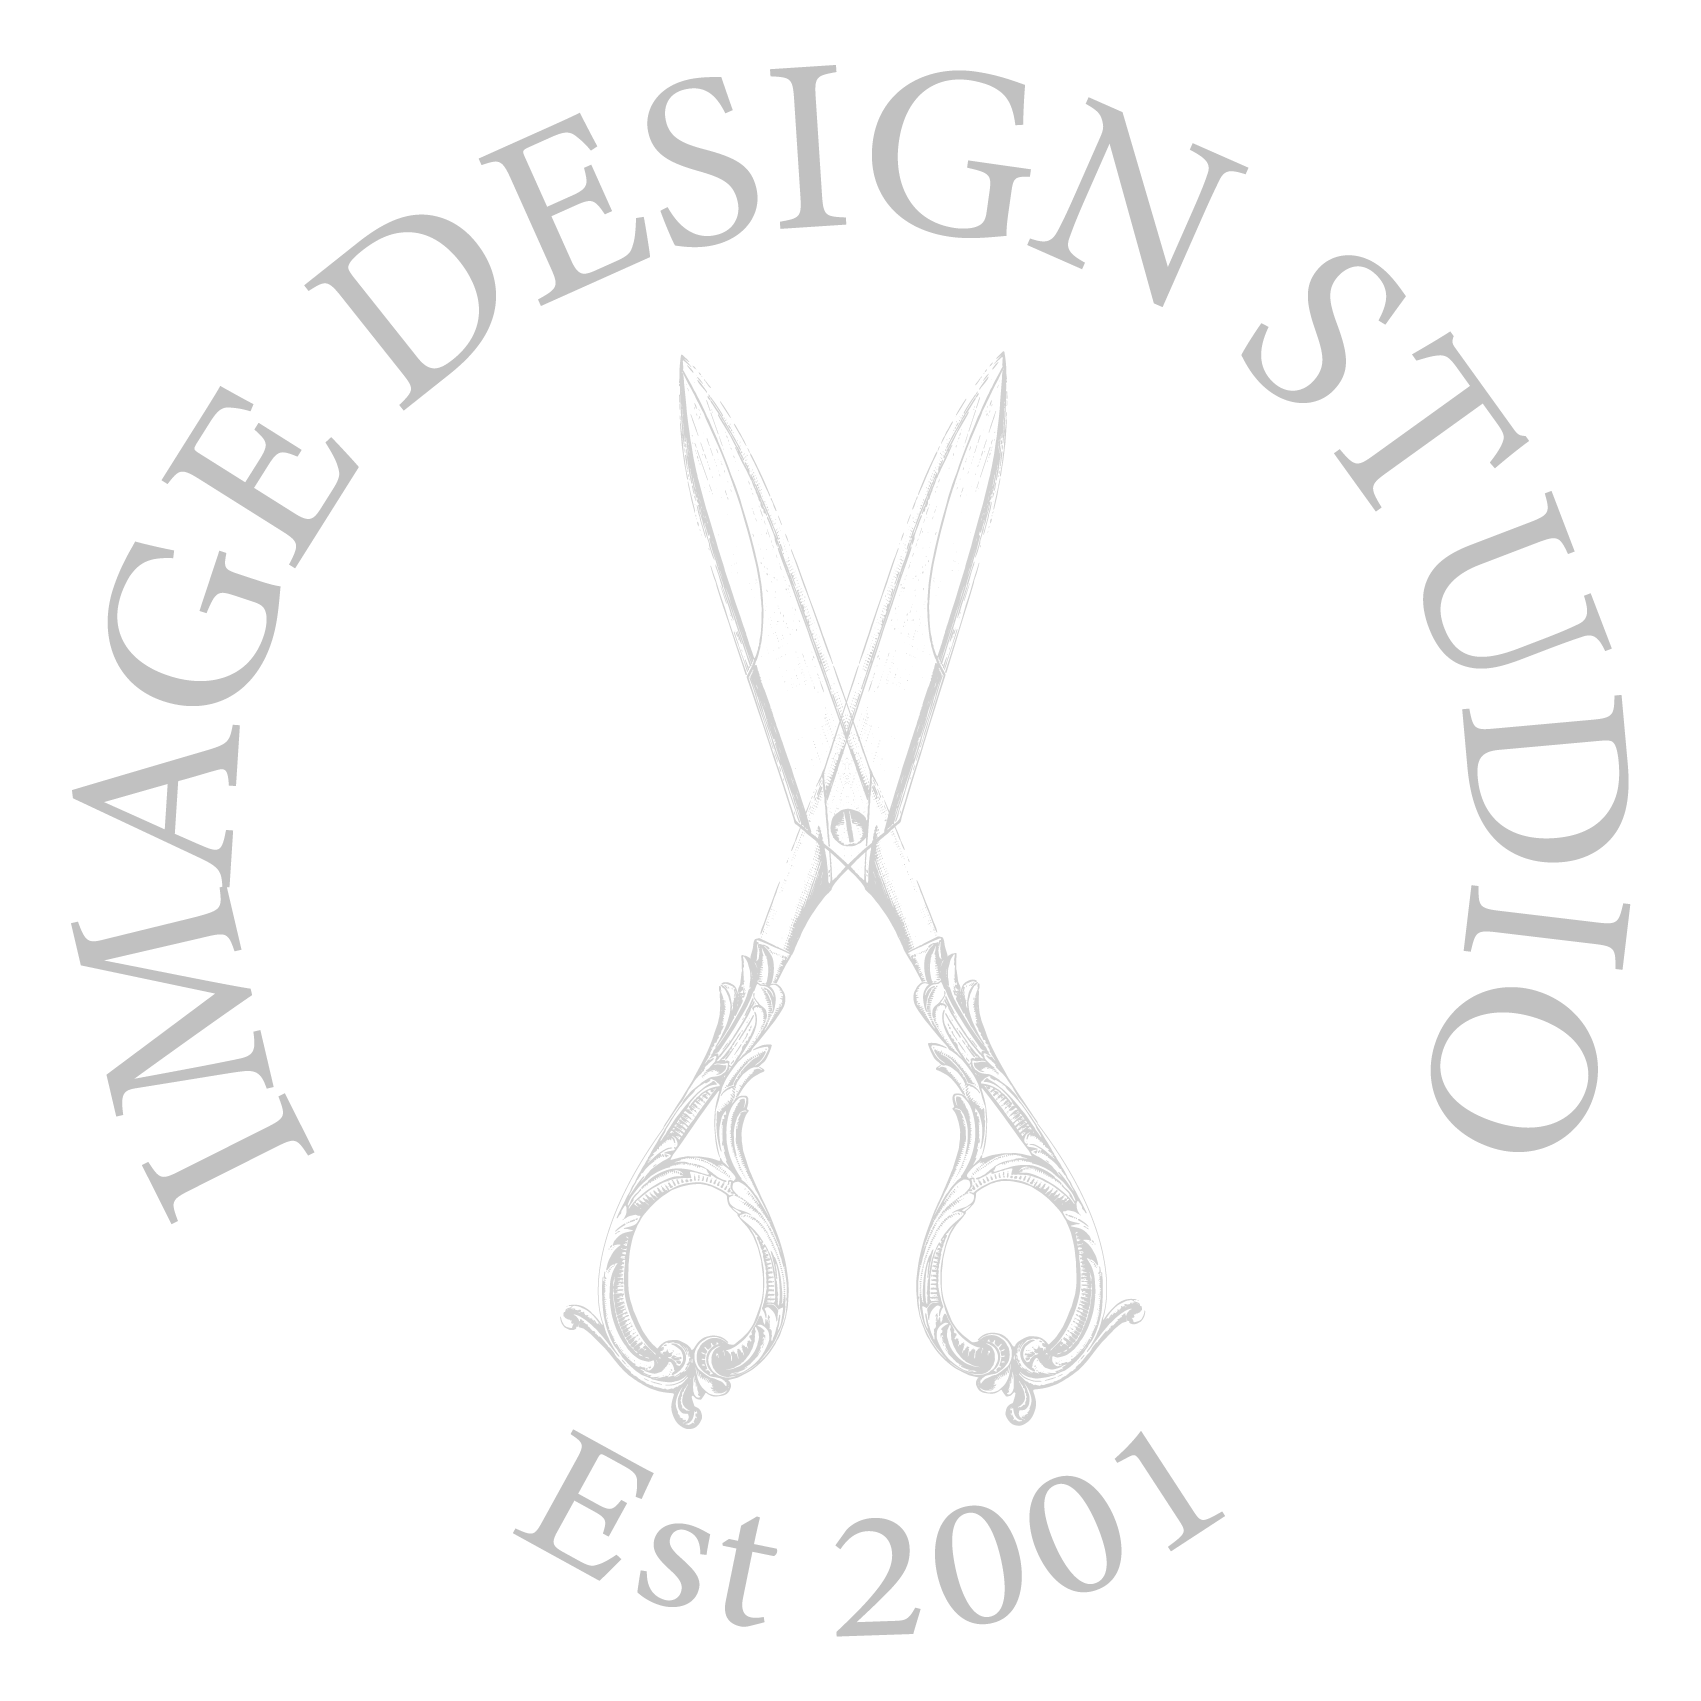 Image Design Studio was Establish in 2001 by Sharron Gough, for all hair replacement methods for men and women with hair loss. Sharron has worked as a hair dressers since her school days and then went into hair replacement to further her passion